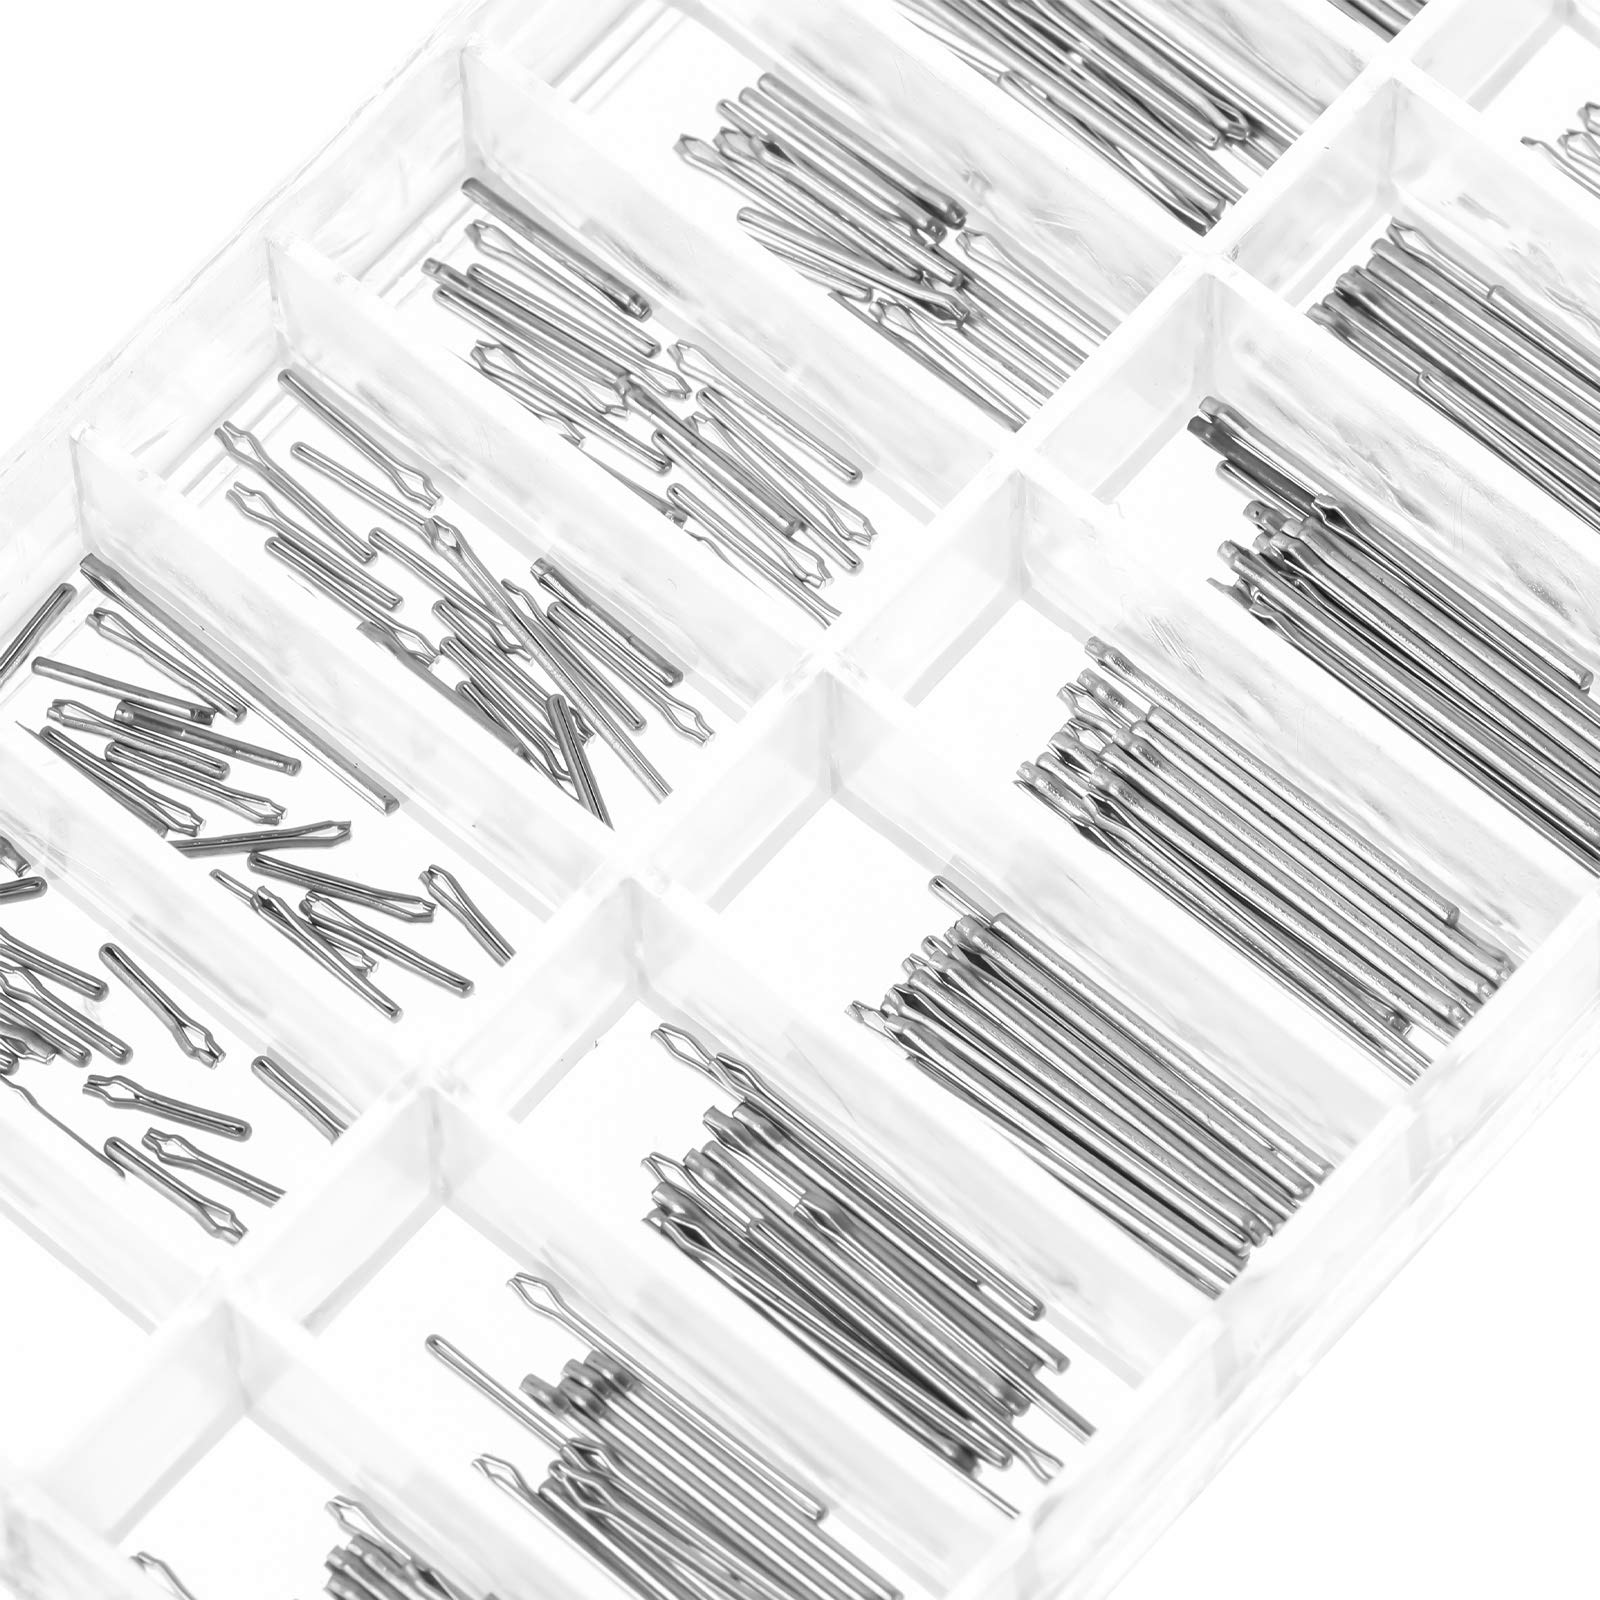 Mudder ds. Distinctive Style 360 Pieces 6-23mm Watch Band Link Cotter Pin Assortment, Silver